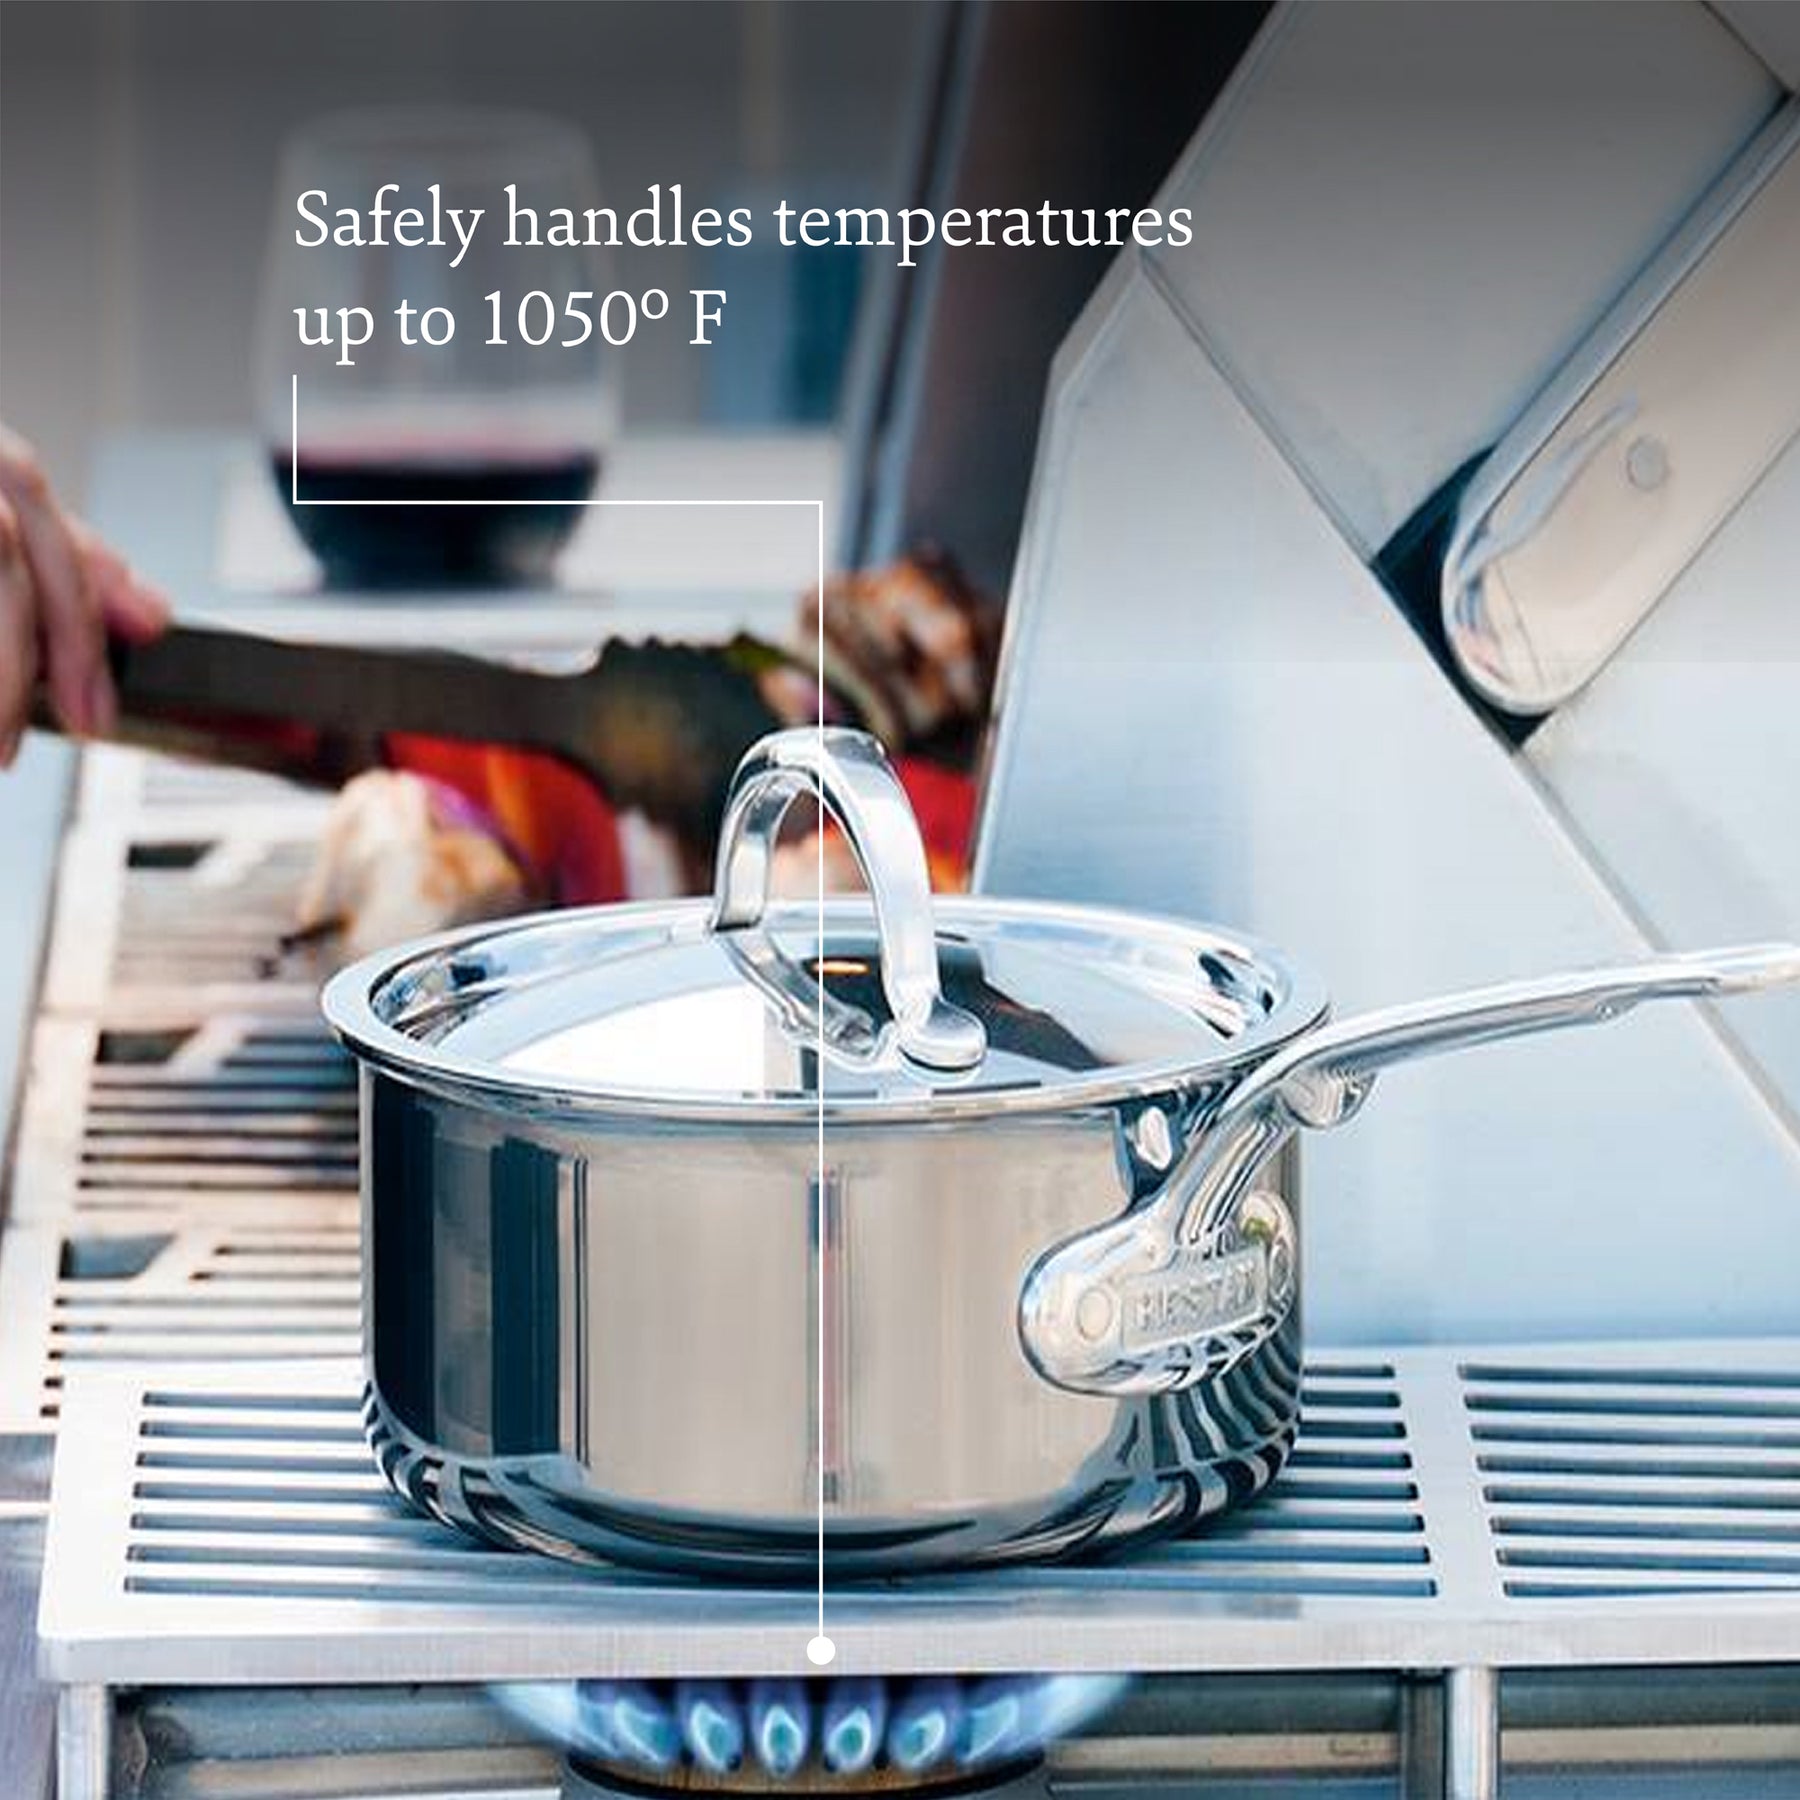 Hestan ProBond Stock Pot - 8-quart Stainless Steel – Cutlery and More